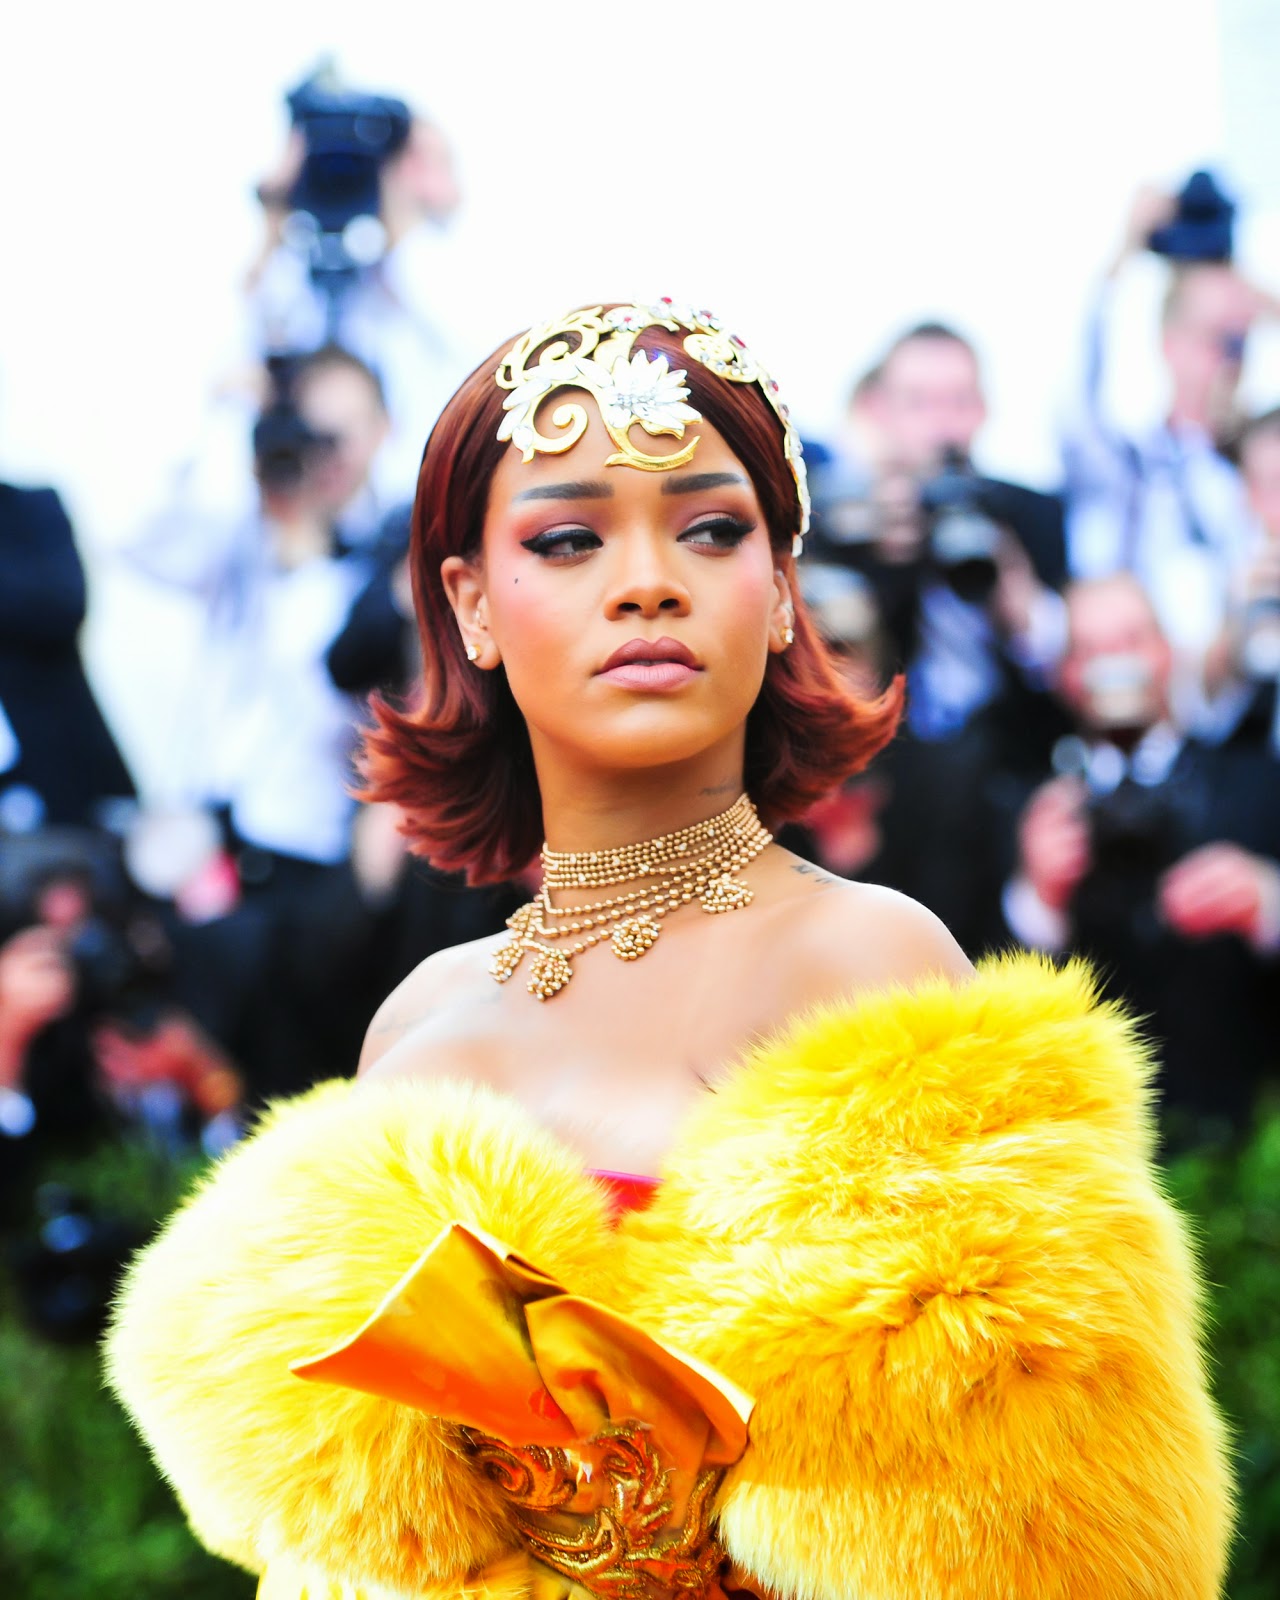 Rihanna Wearing Guo Pei Couture At 2015 Met Gala In New York City Photo